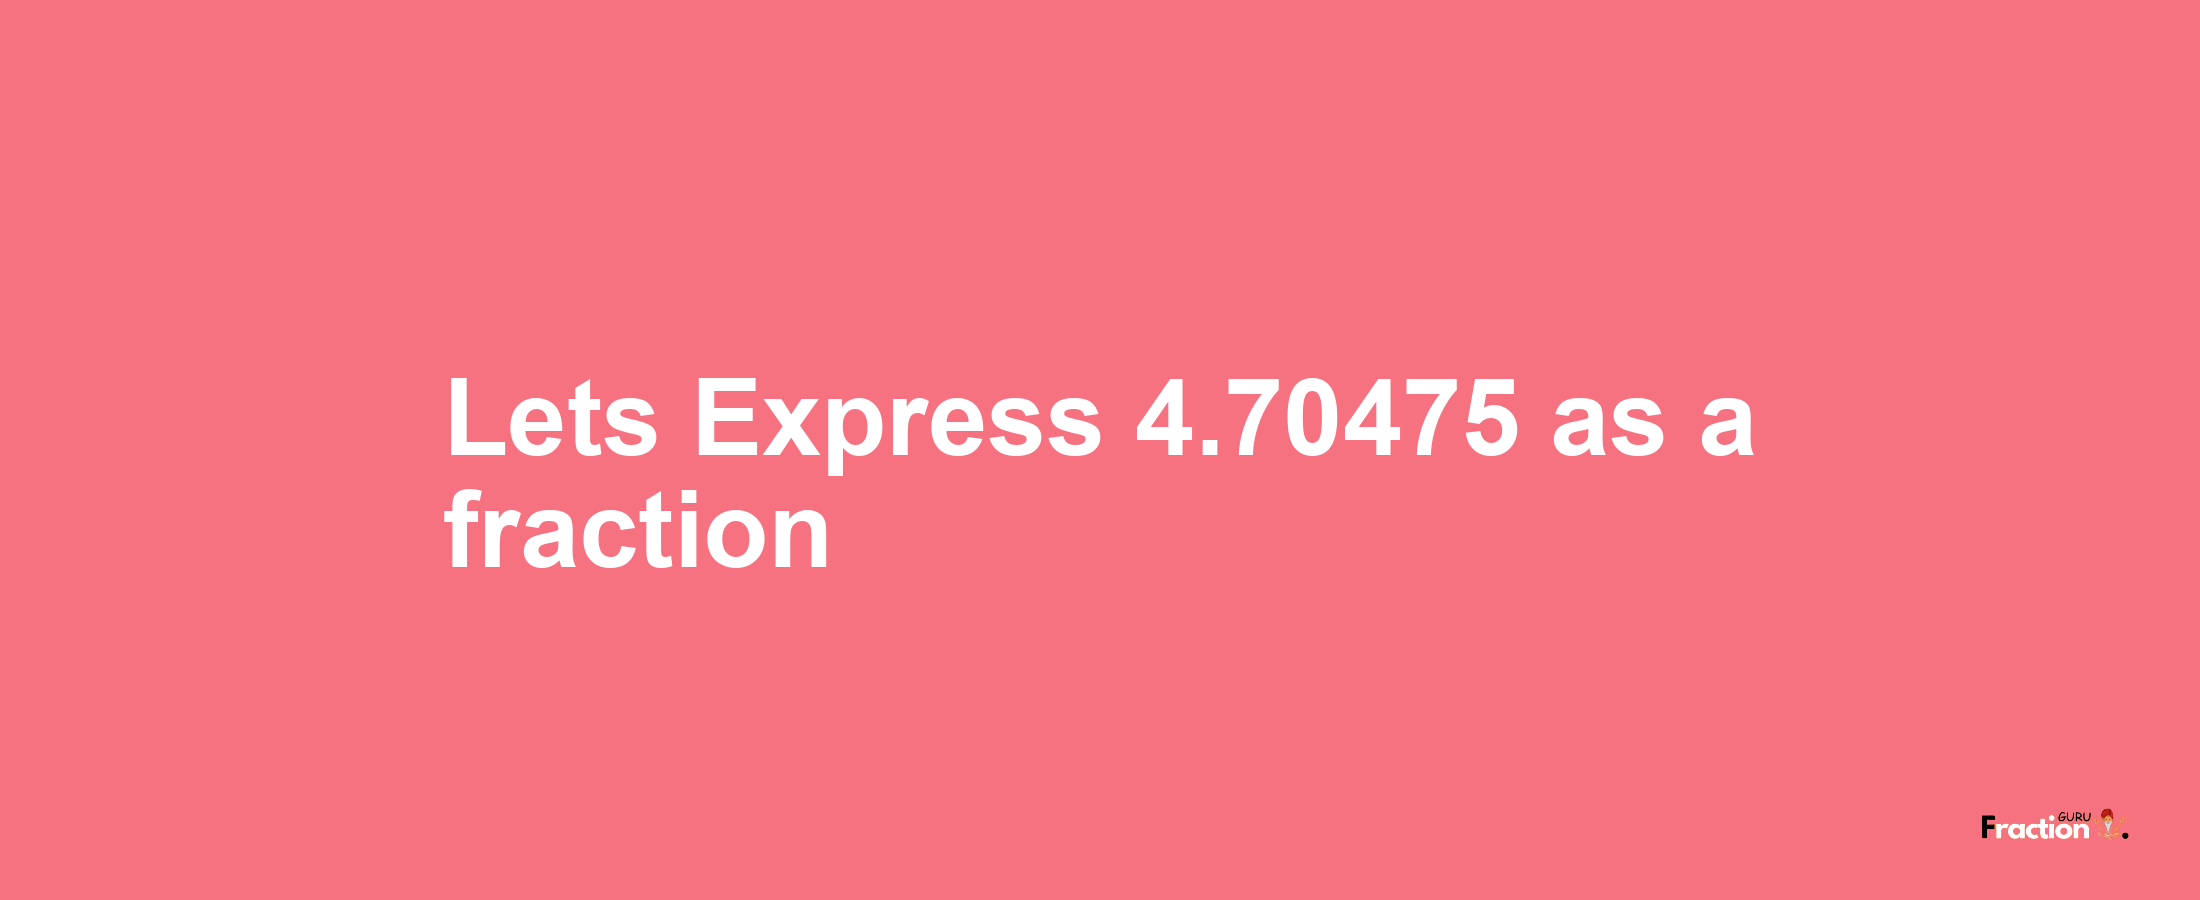 Lets Express 4.70475 as afraction